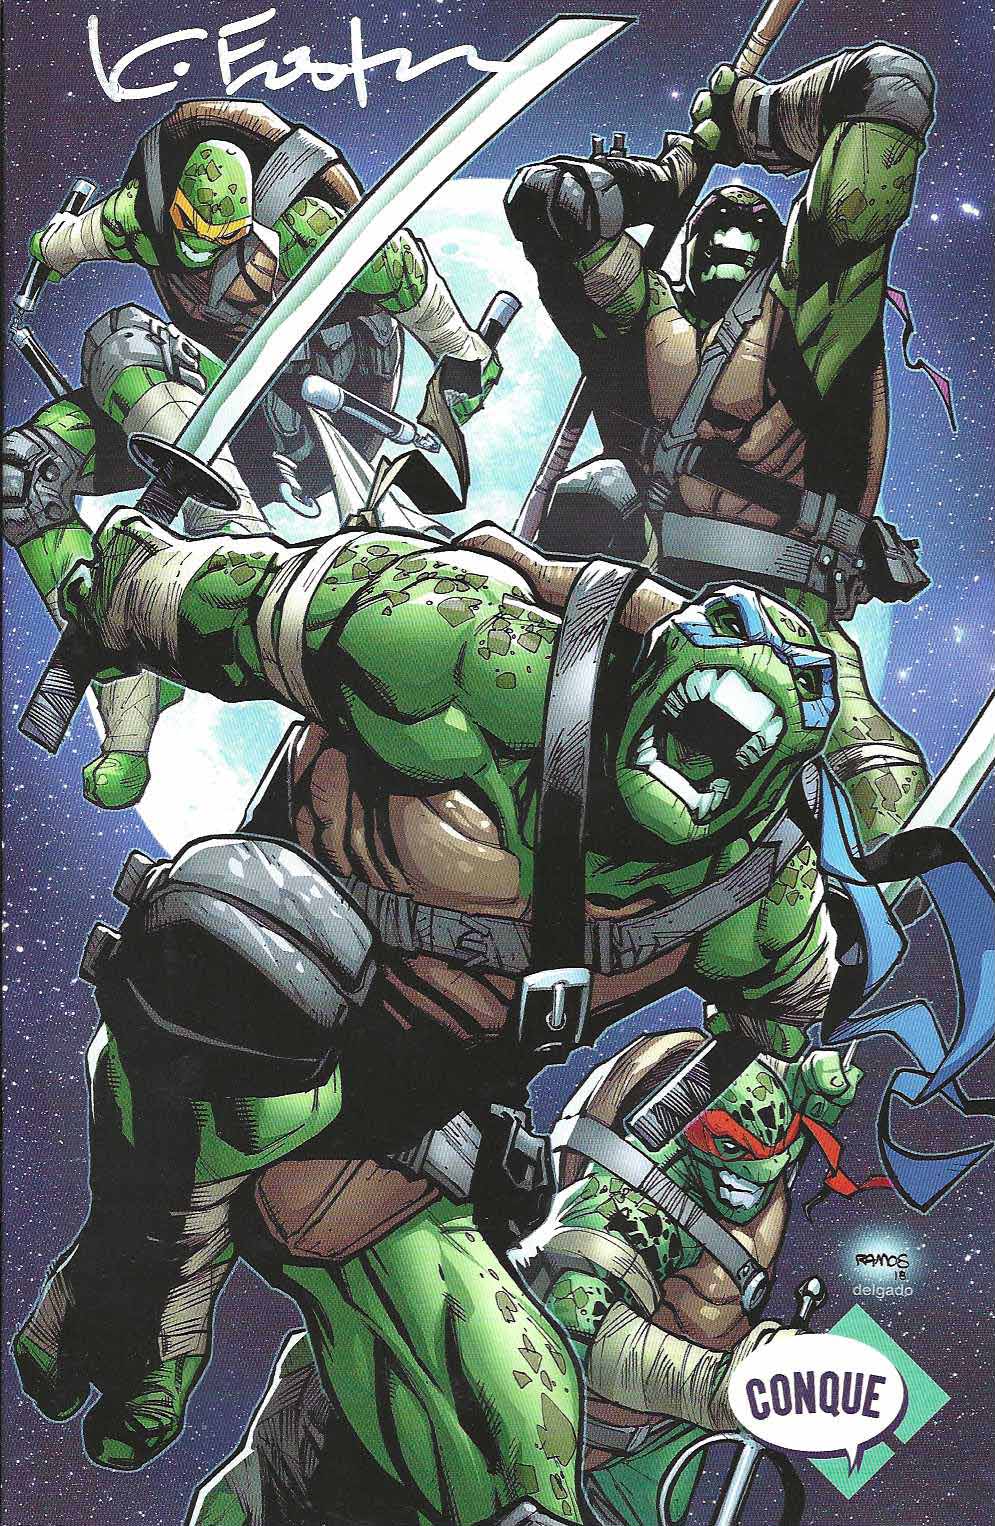 TMNT 81 RE Conque, Variant Cover – Humbertos Ramos – Signed